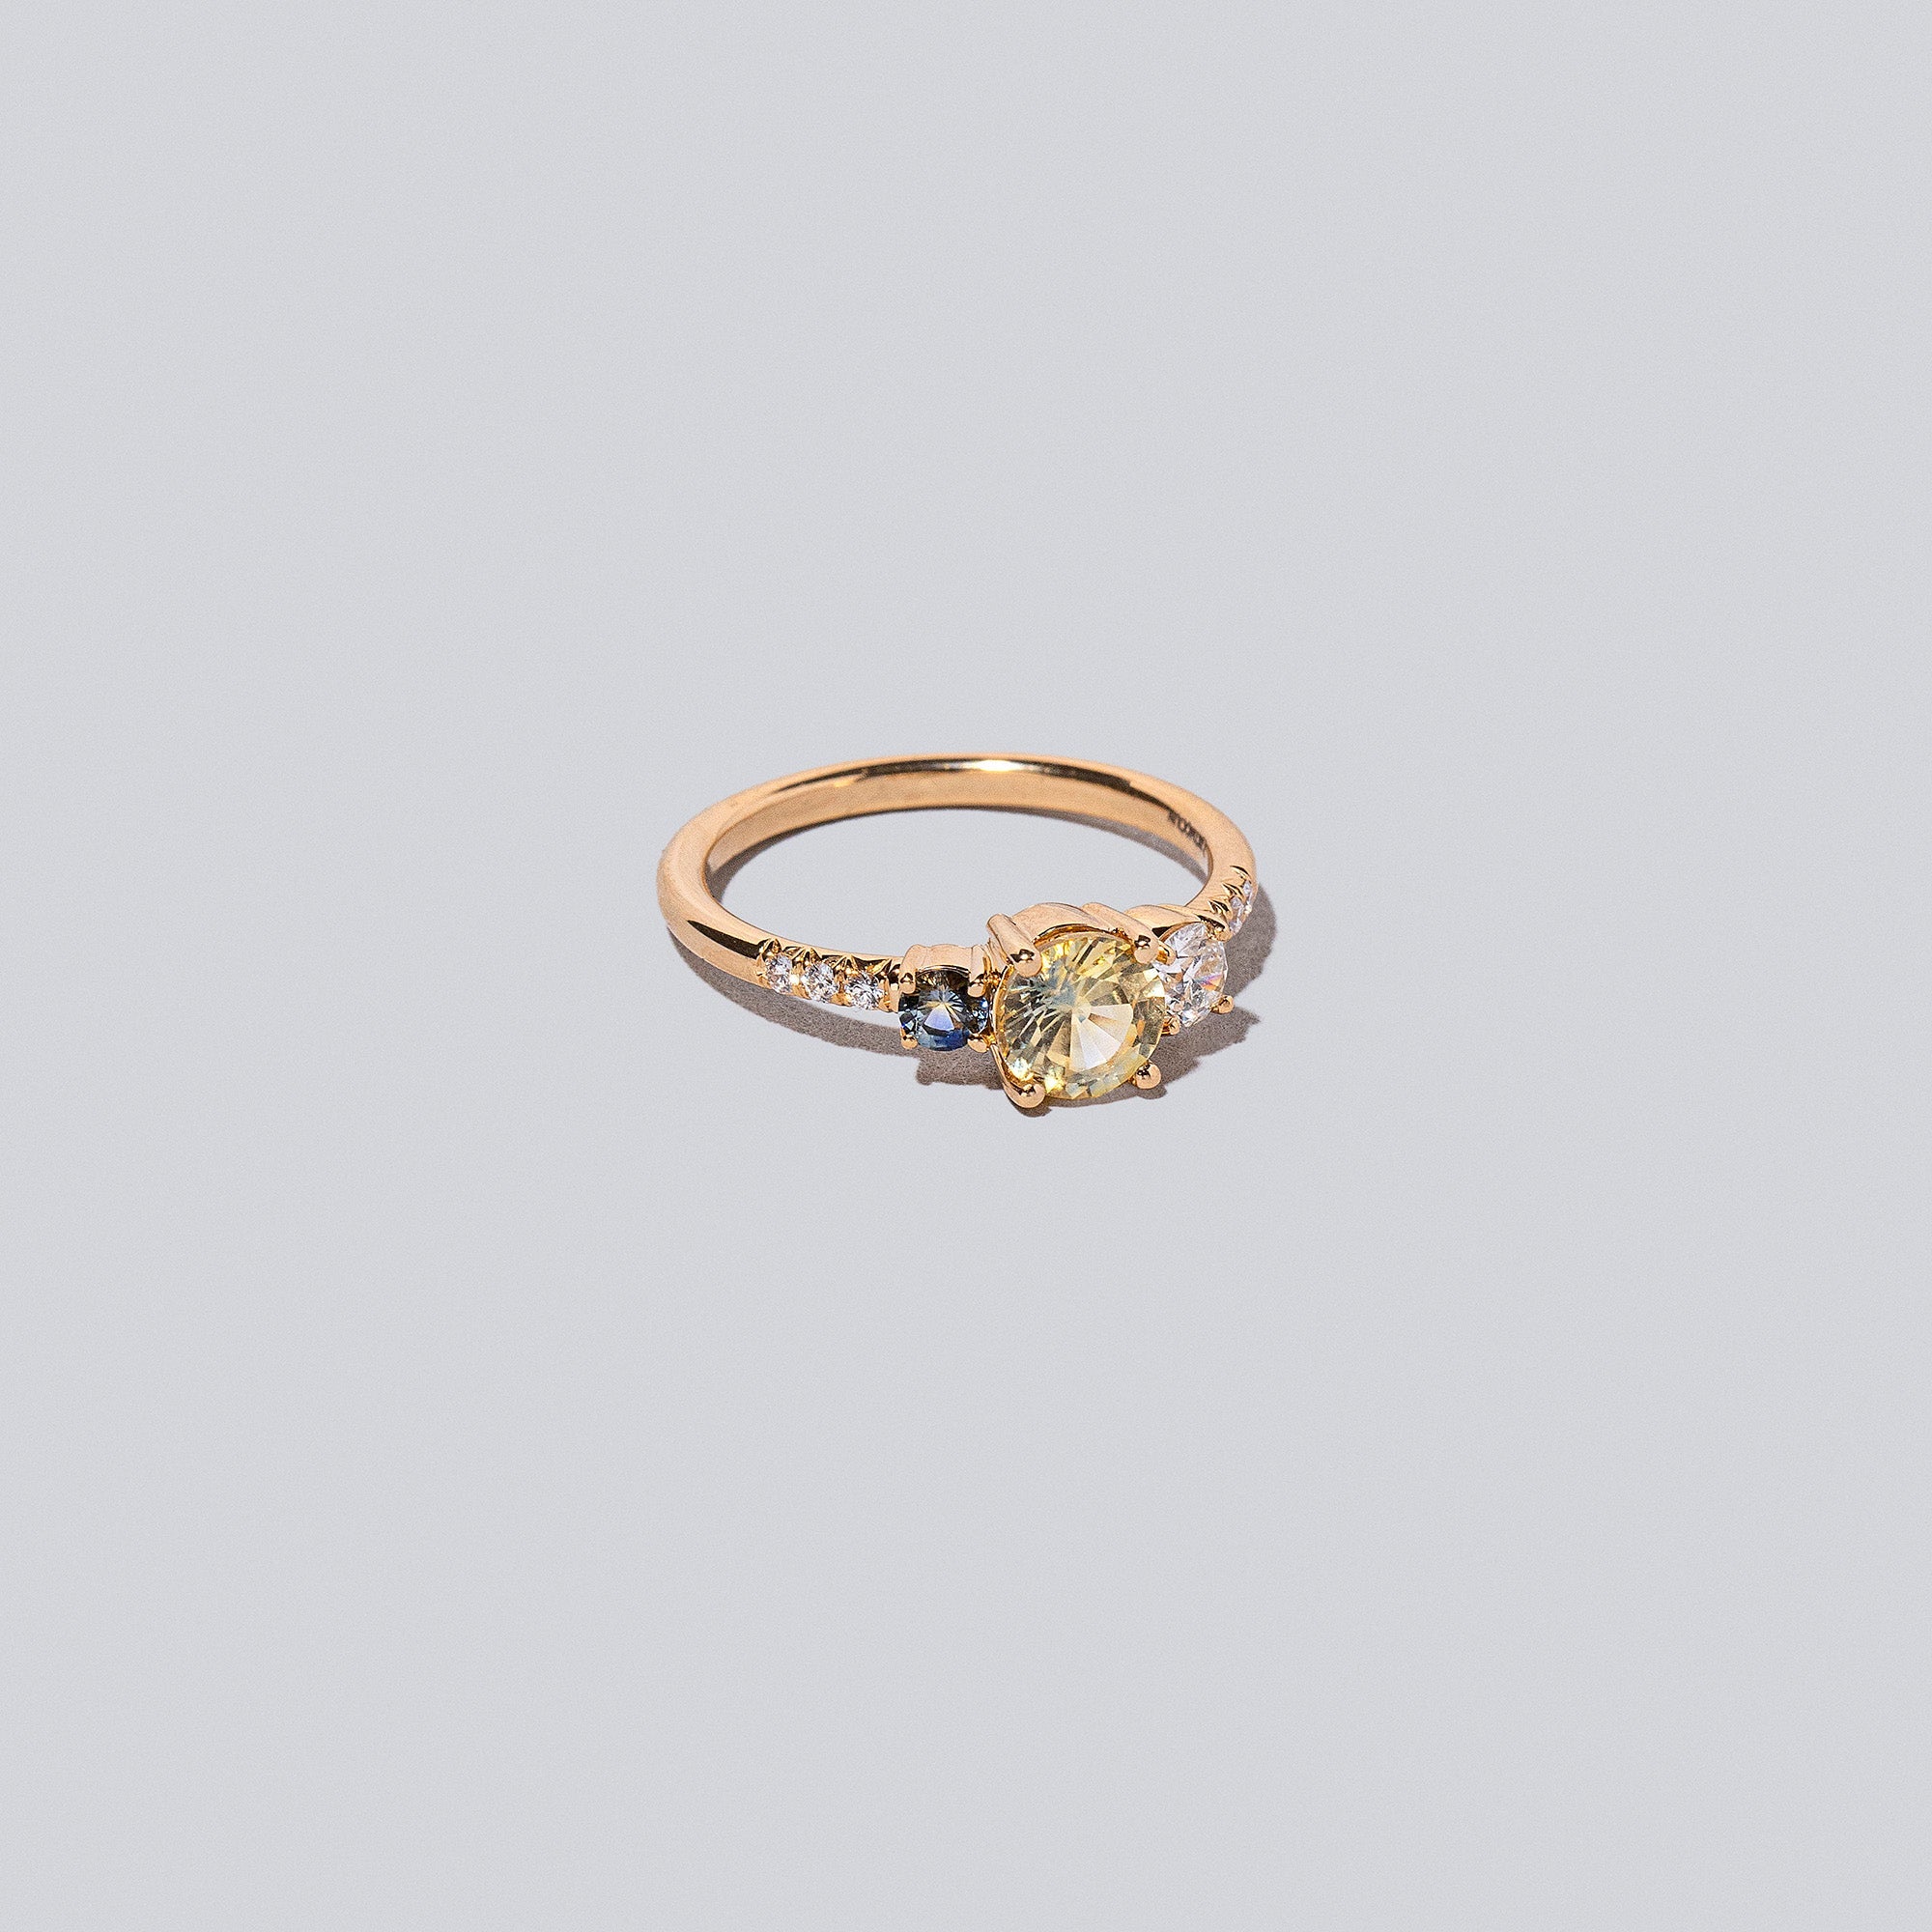 product_details::Orion Ring on light colored background.